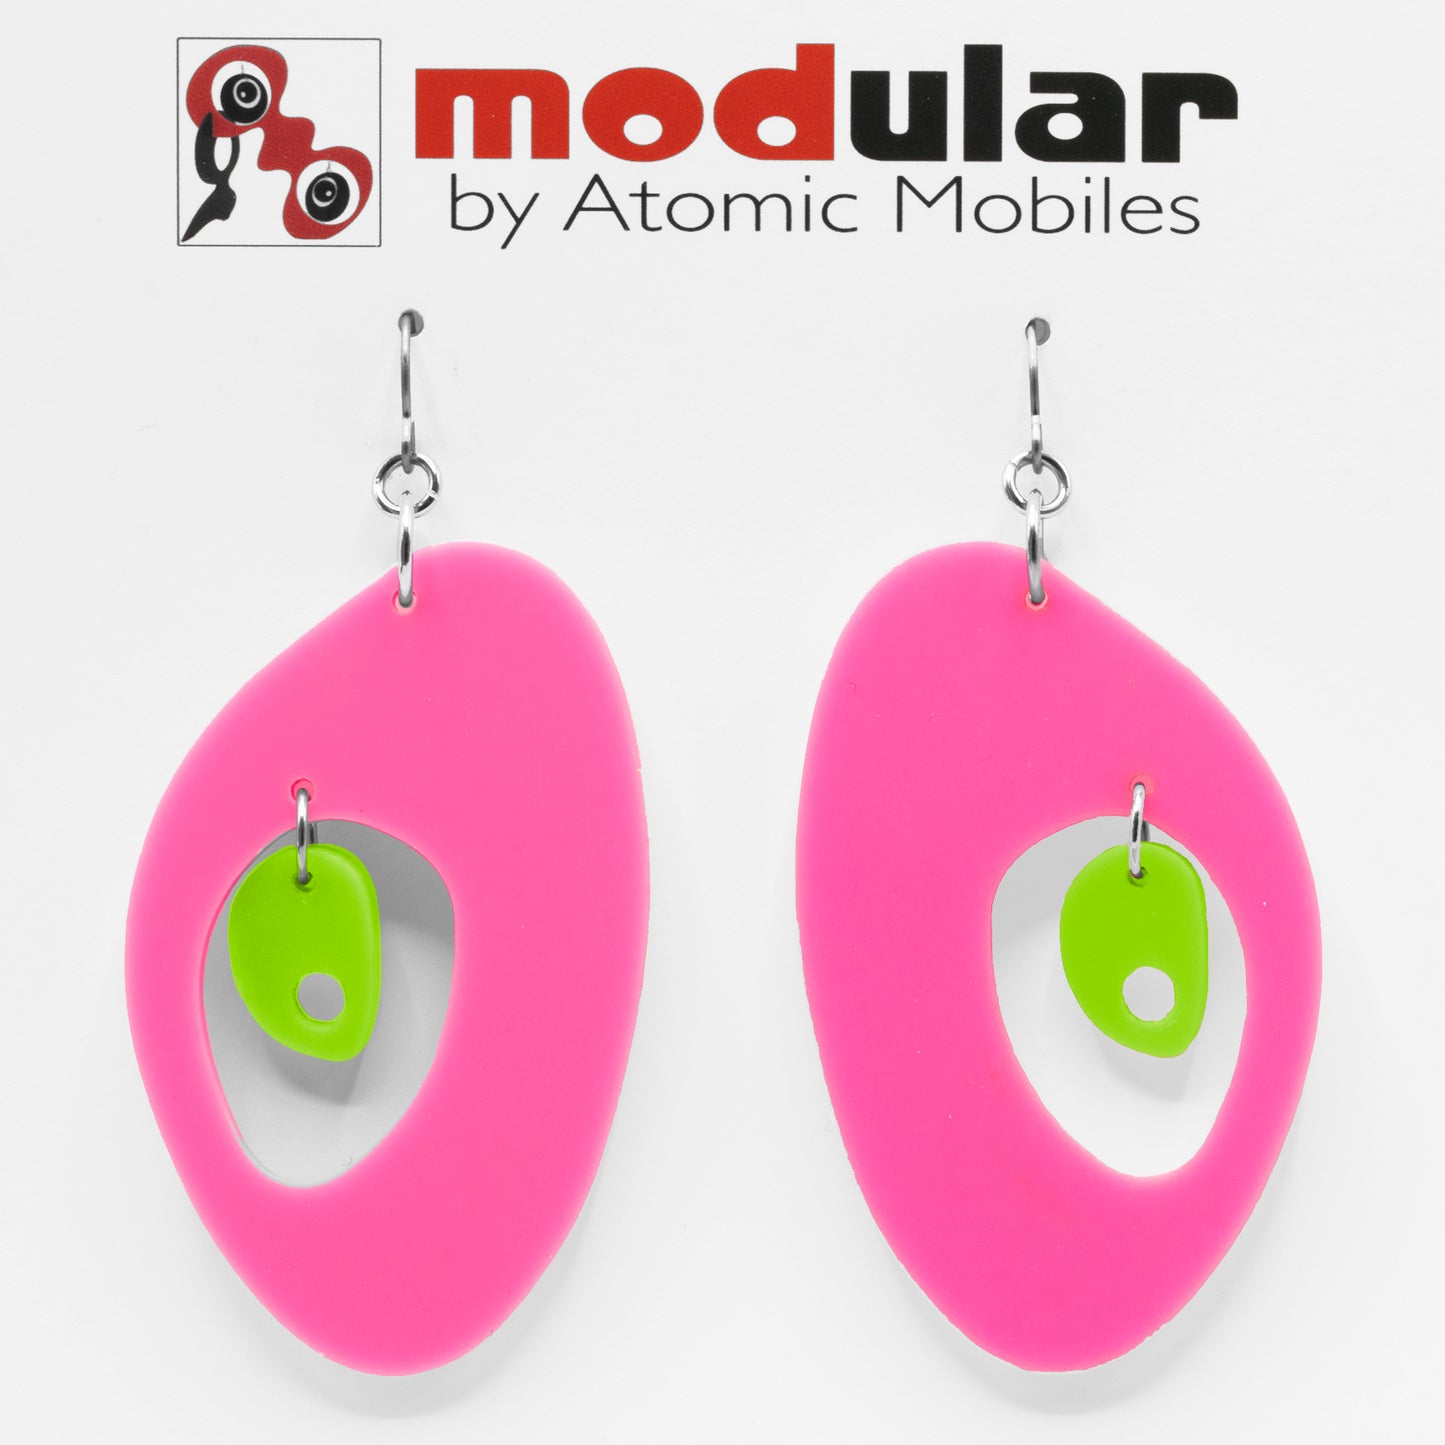 MODular Earrings - The Modernist Statement Earrings in Hot Pink and Lime by AtomicMobiles.com - retro era inspired mod handmade jewelry